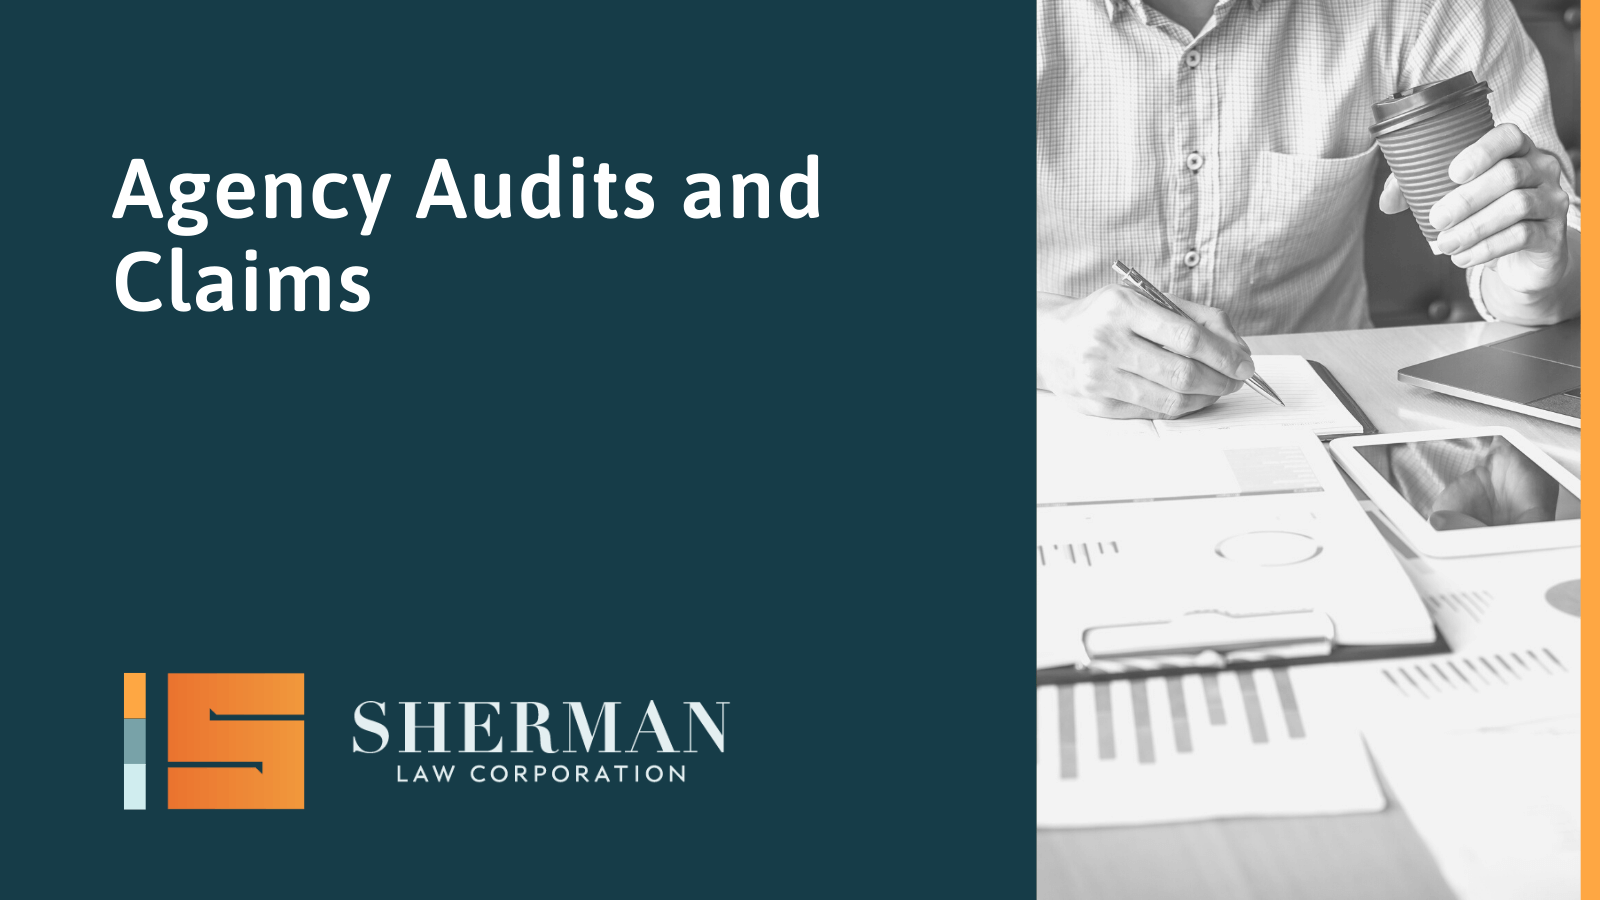 Agency Audits and Claims - sherman law corporation